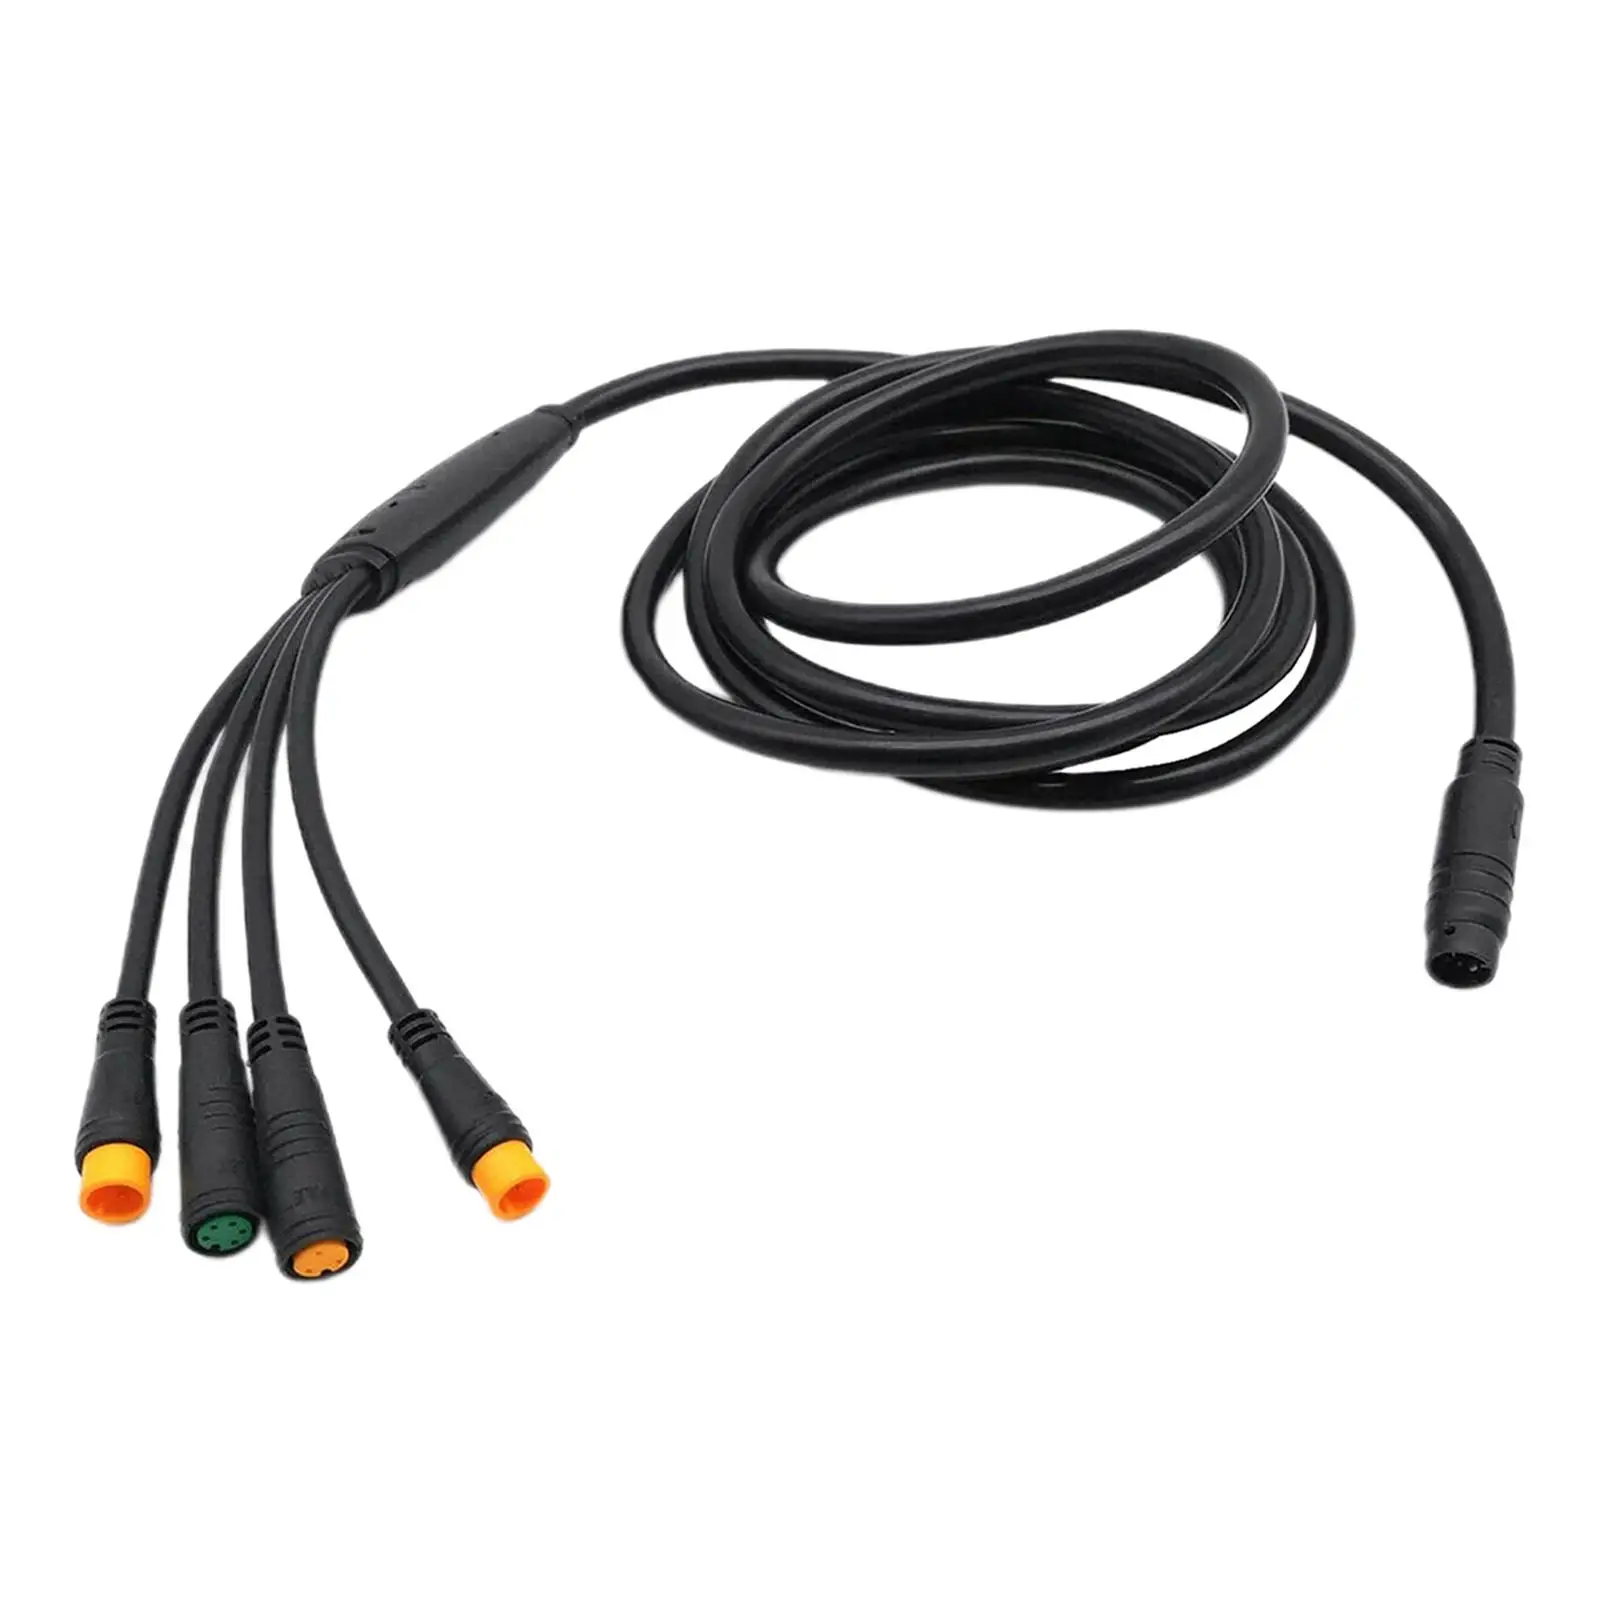 1T4 Cable  1 in 4 Wires for Displaying The Throttle Brake of The